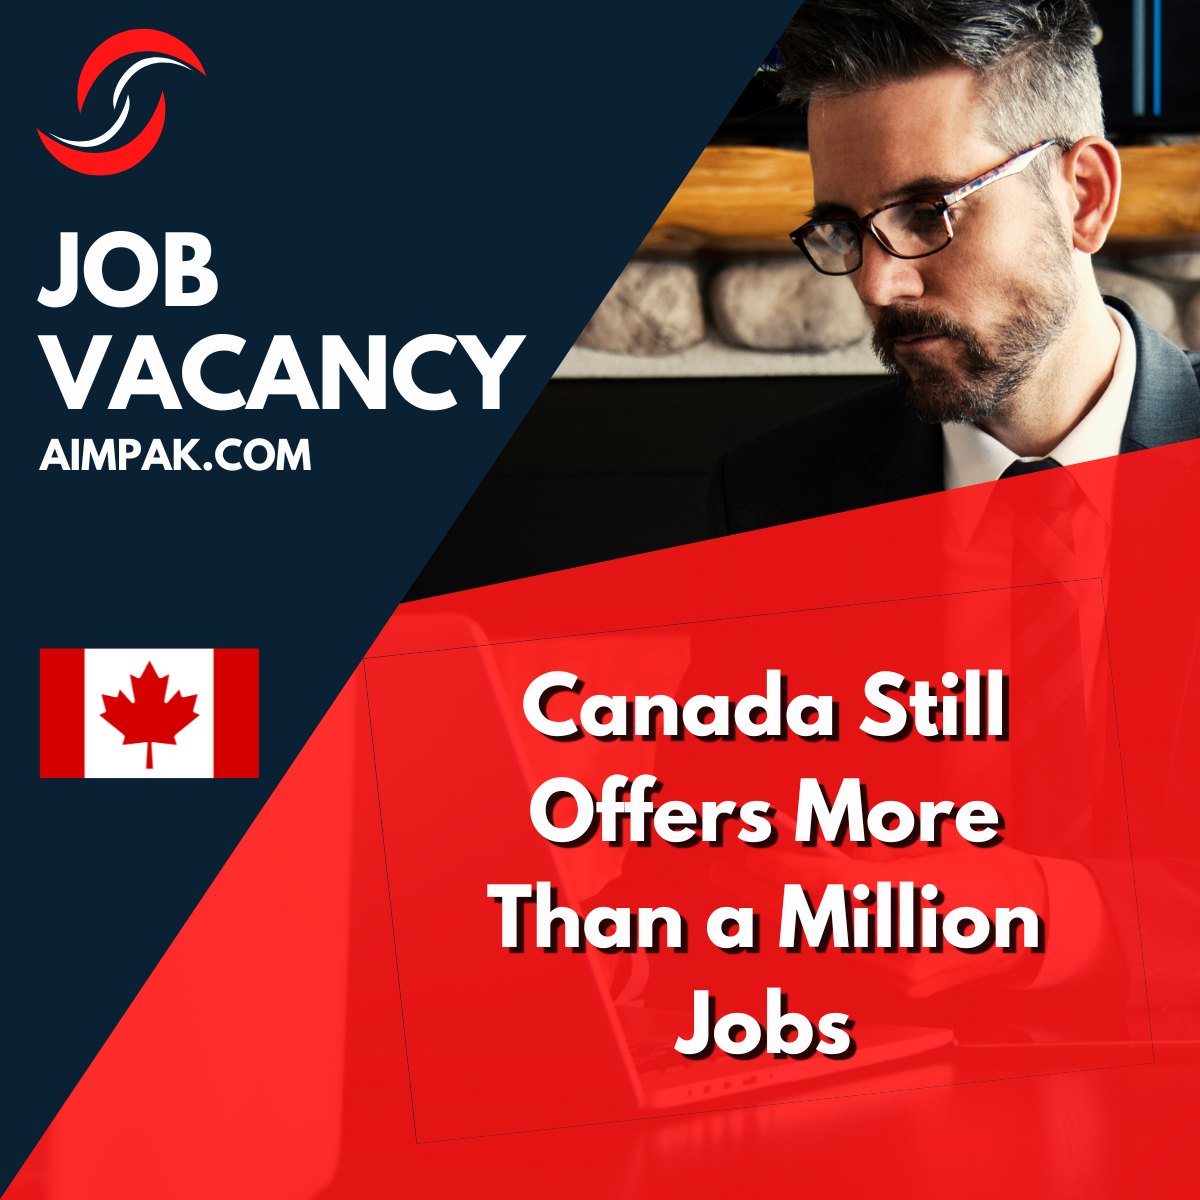 Canada Still Offers More Than a Million Jobs